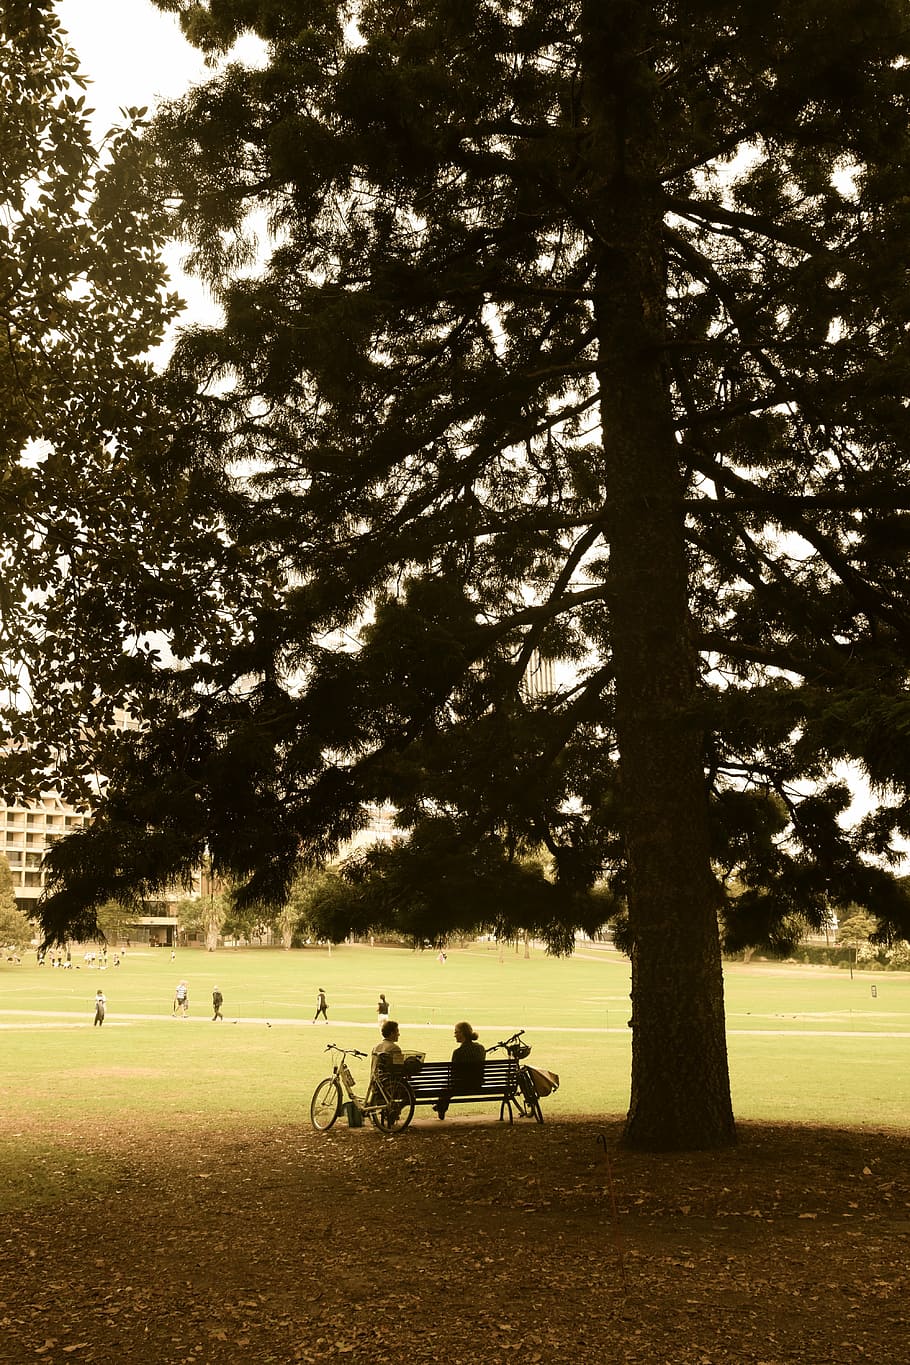 dialog, friends, park, tree, plant, nature, land, bicycle, field, real people